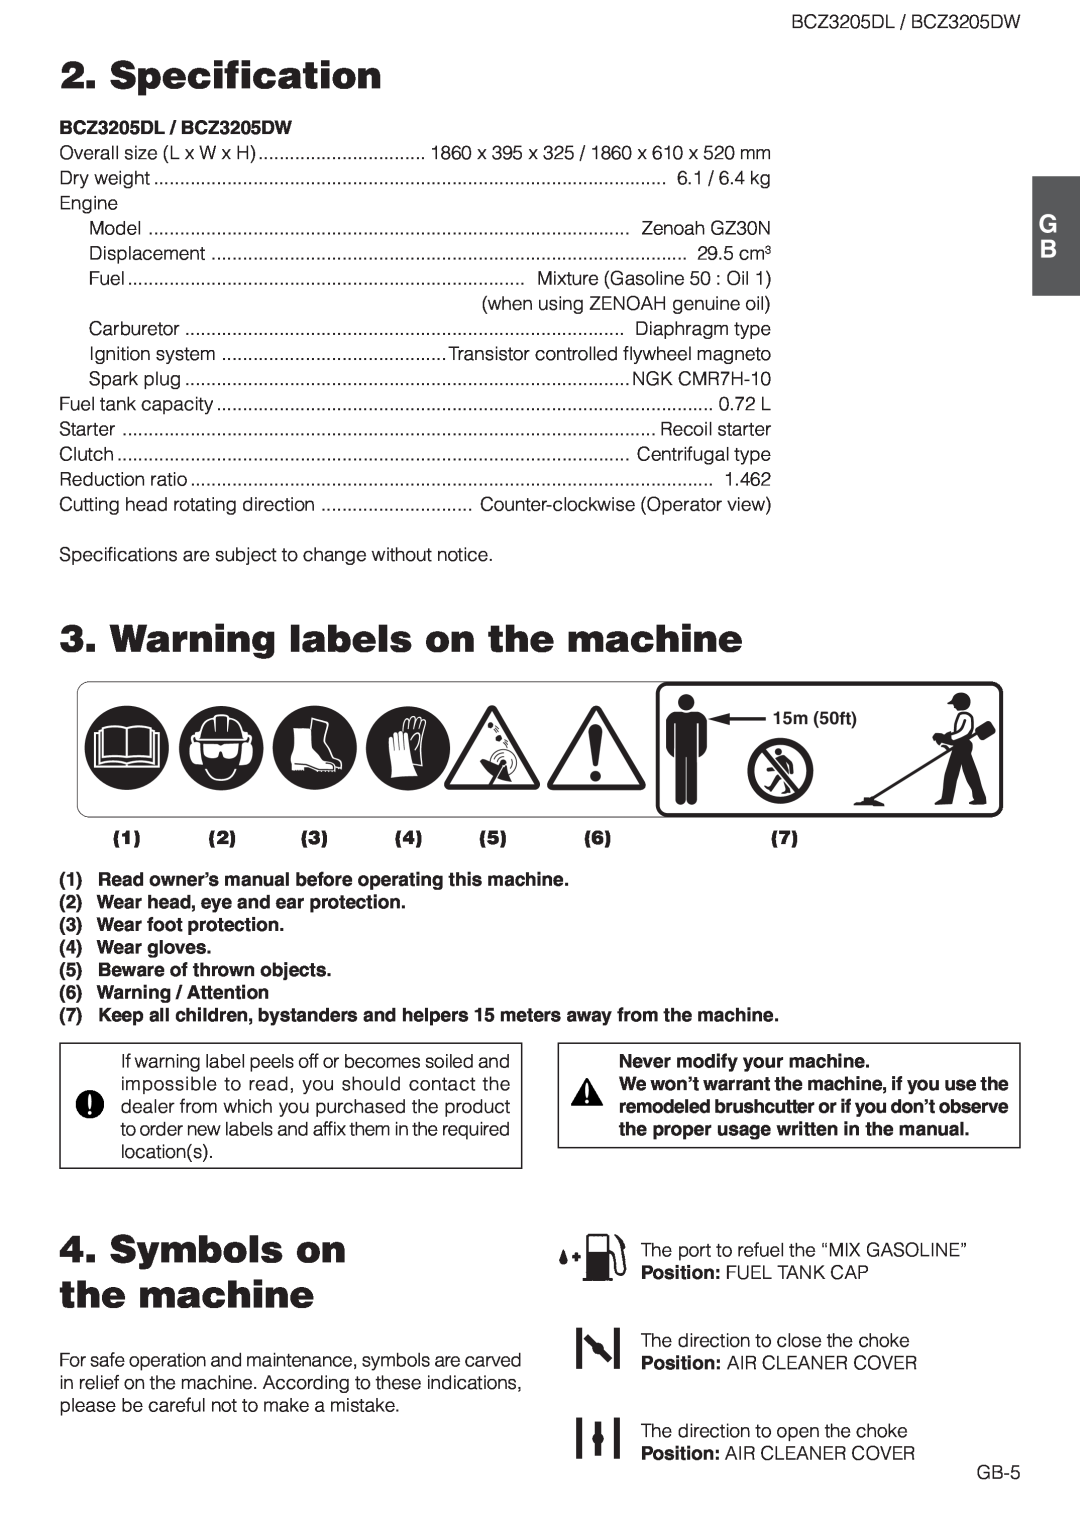 Husqvarna owner manual Specification, Warning labels on the machine, Symbols on the machine, BCZ3205DL / BCZ3205DW 